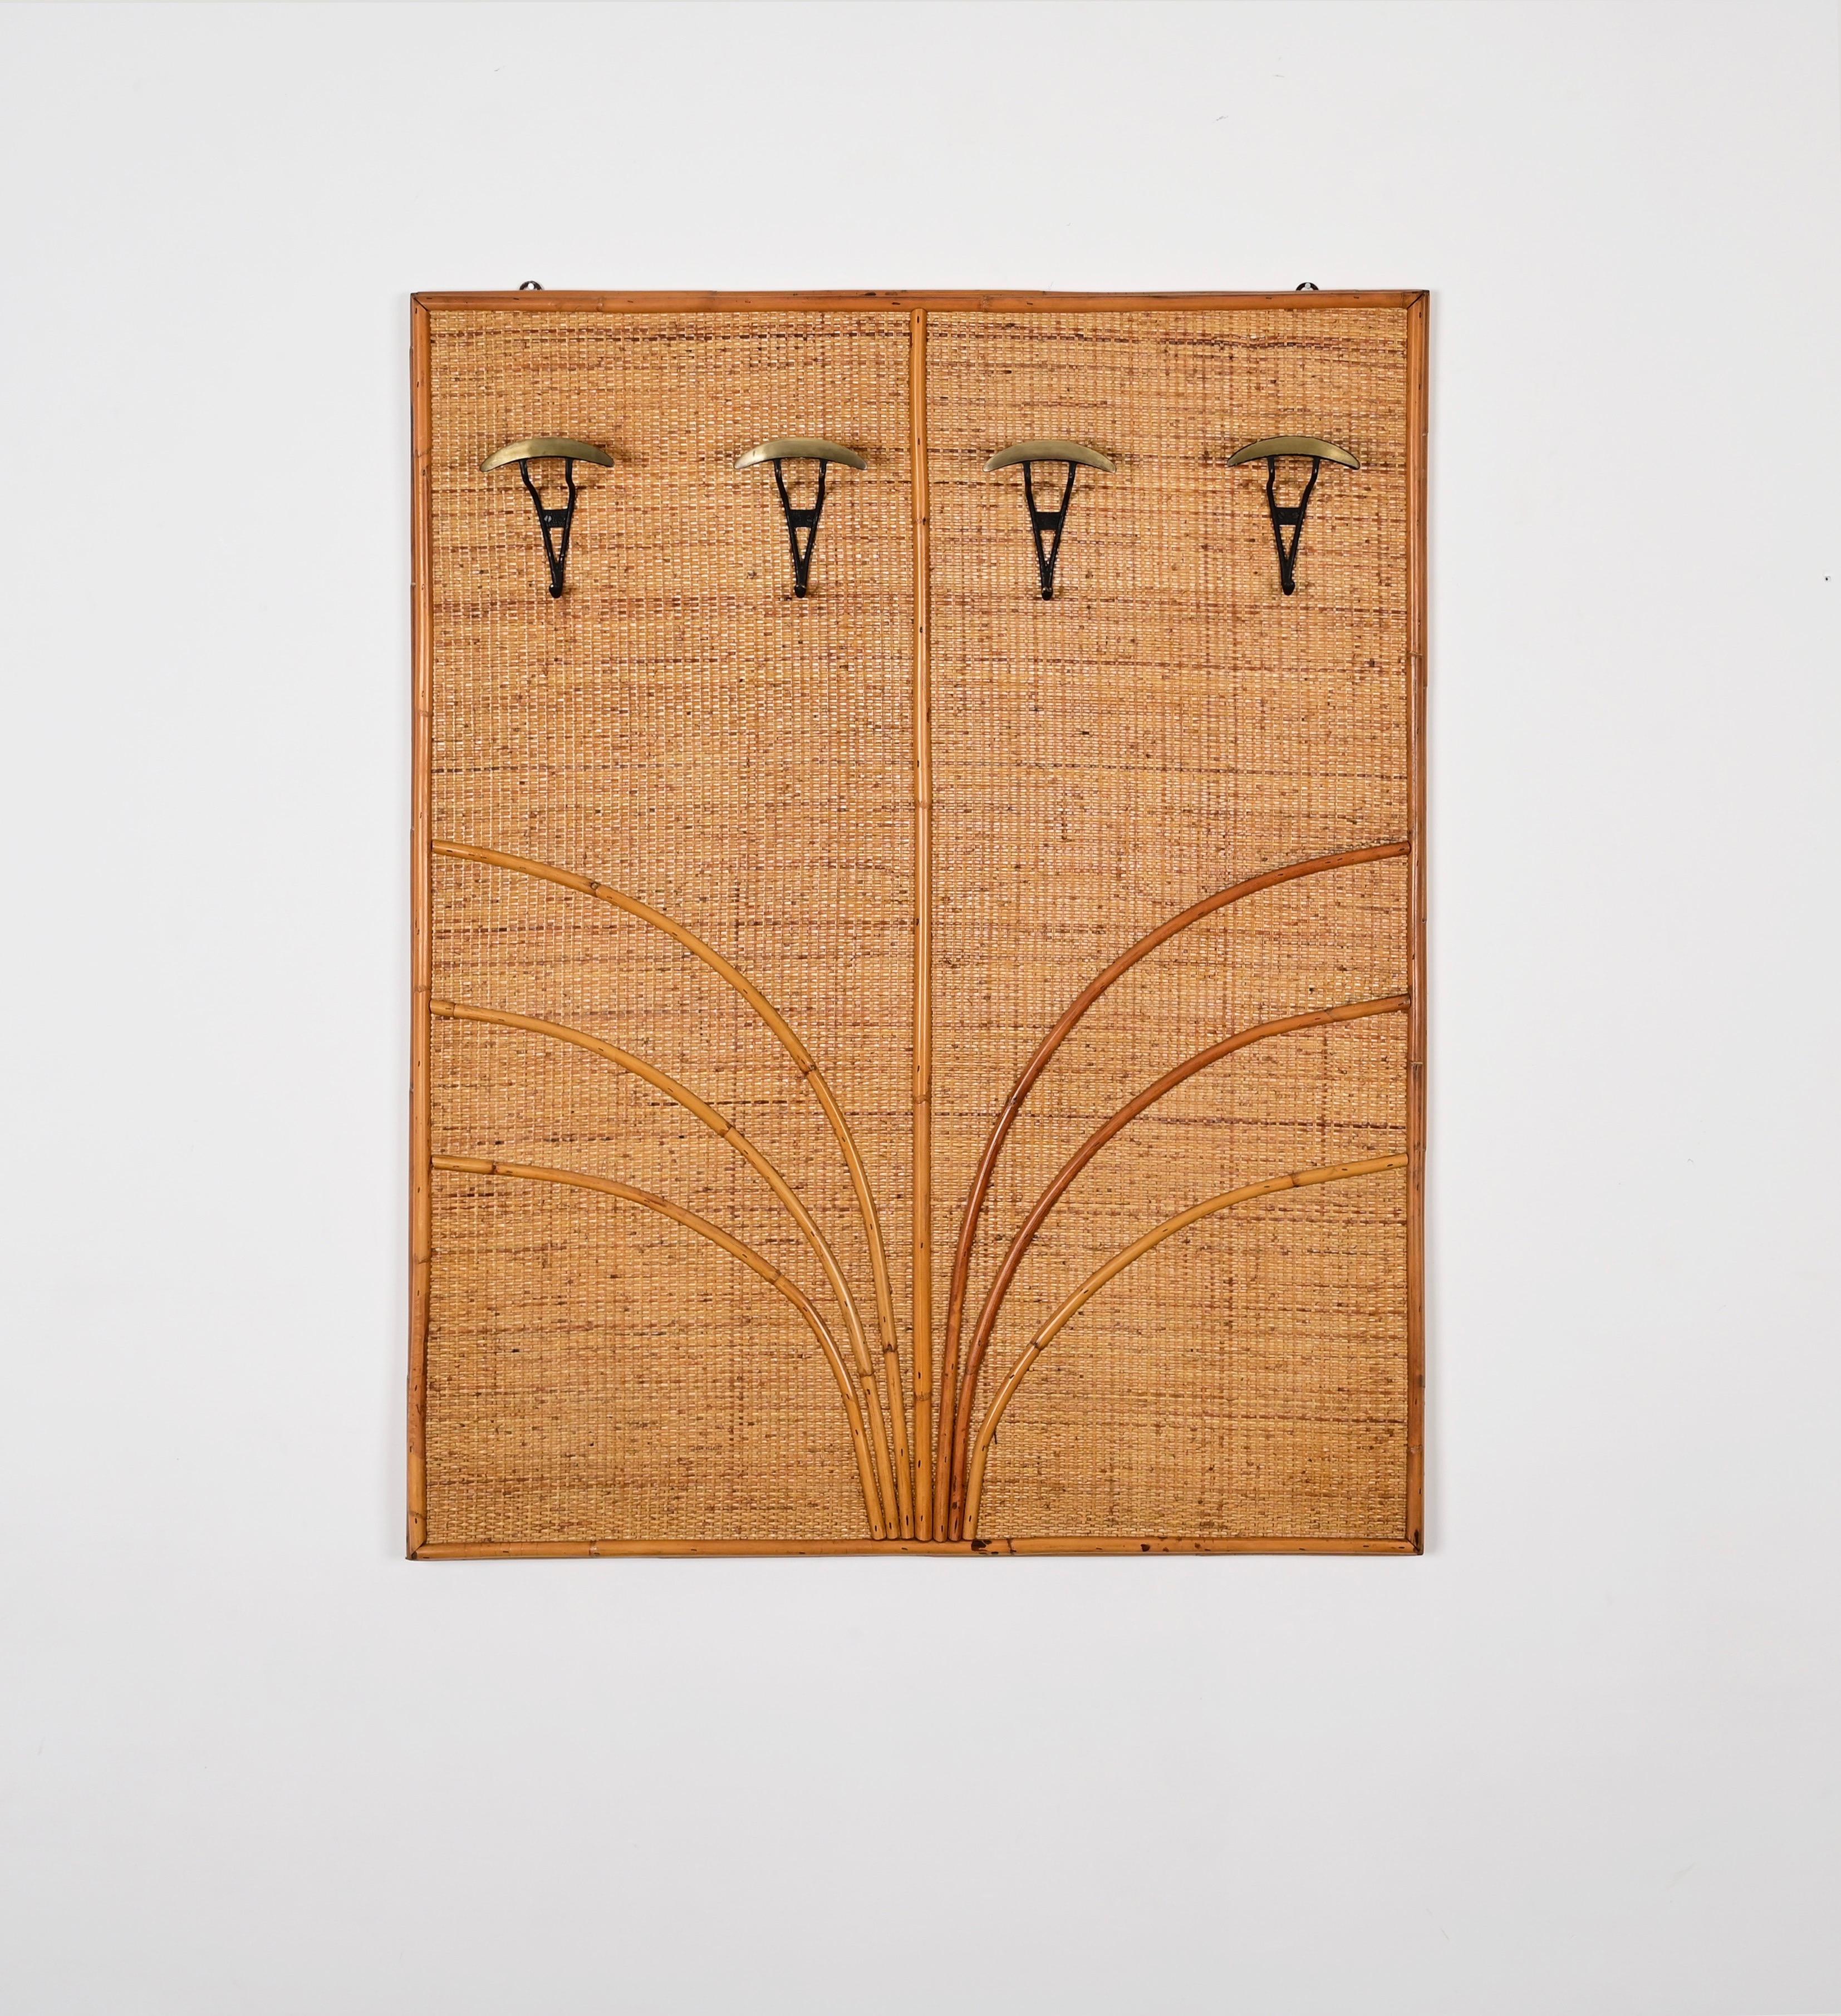 Vivai Del Sud Italian Coat Rack in Rattan, Bamboo and Brass, Italy 1970s For Sale 5